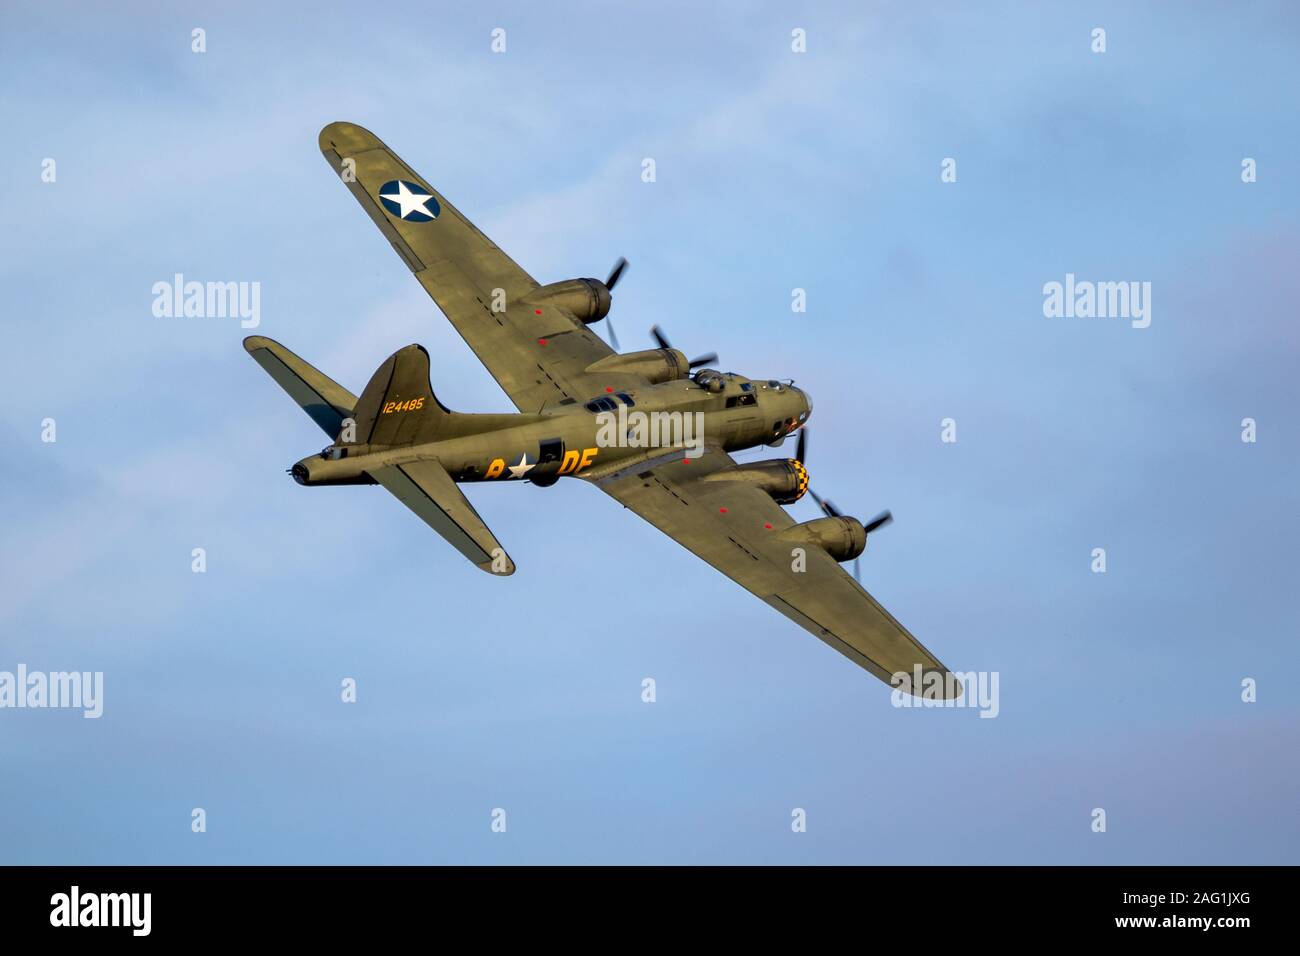 SANICOLE, BELGIUM - SEP 13, 2019: Vintage warbird US Air Force Boeing B-17 Flying Fortress WW2 bomber plane perforing at the Sanice Sunset Airshow. Stock Photo